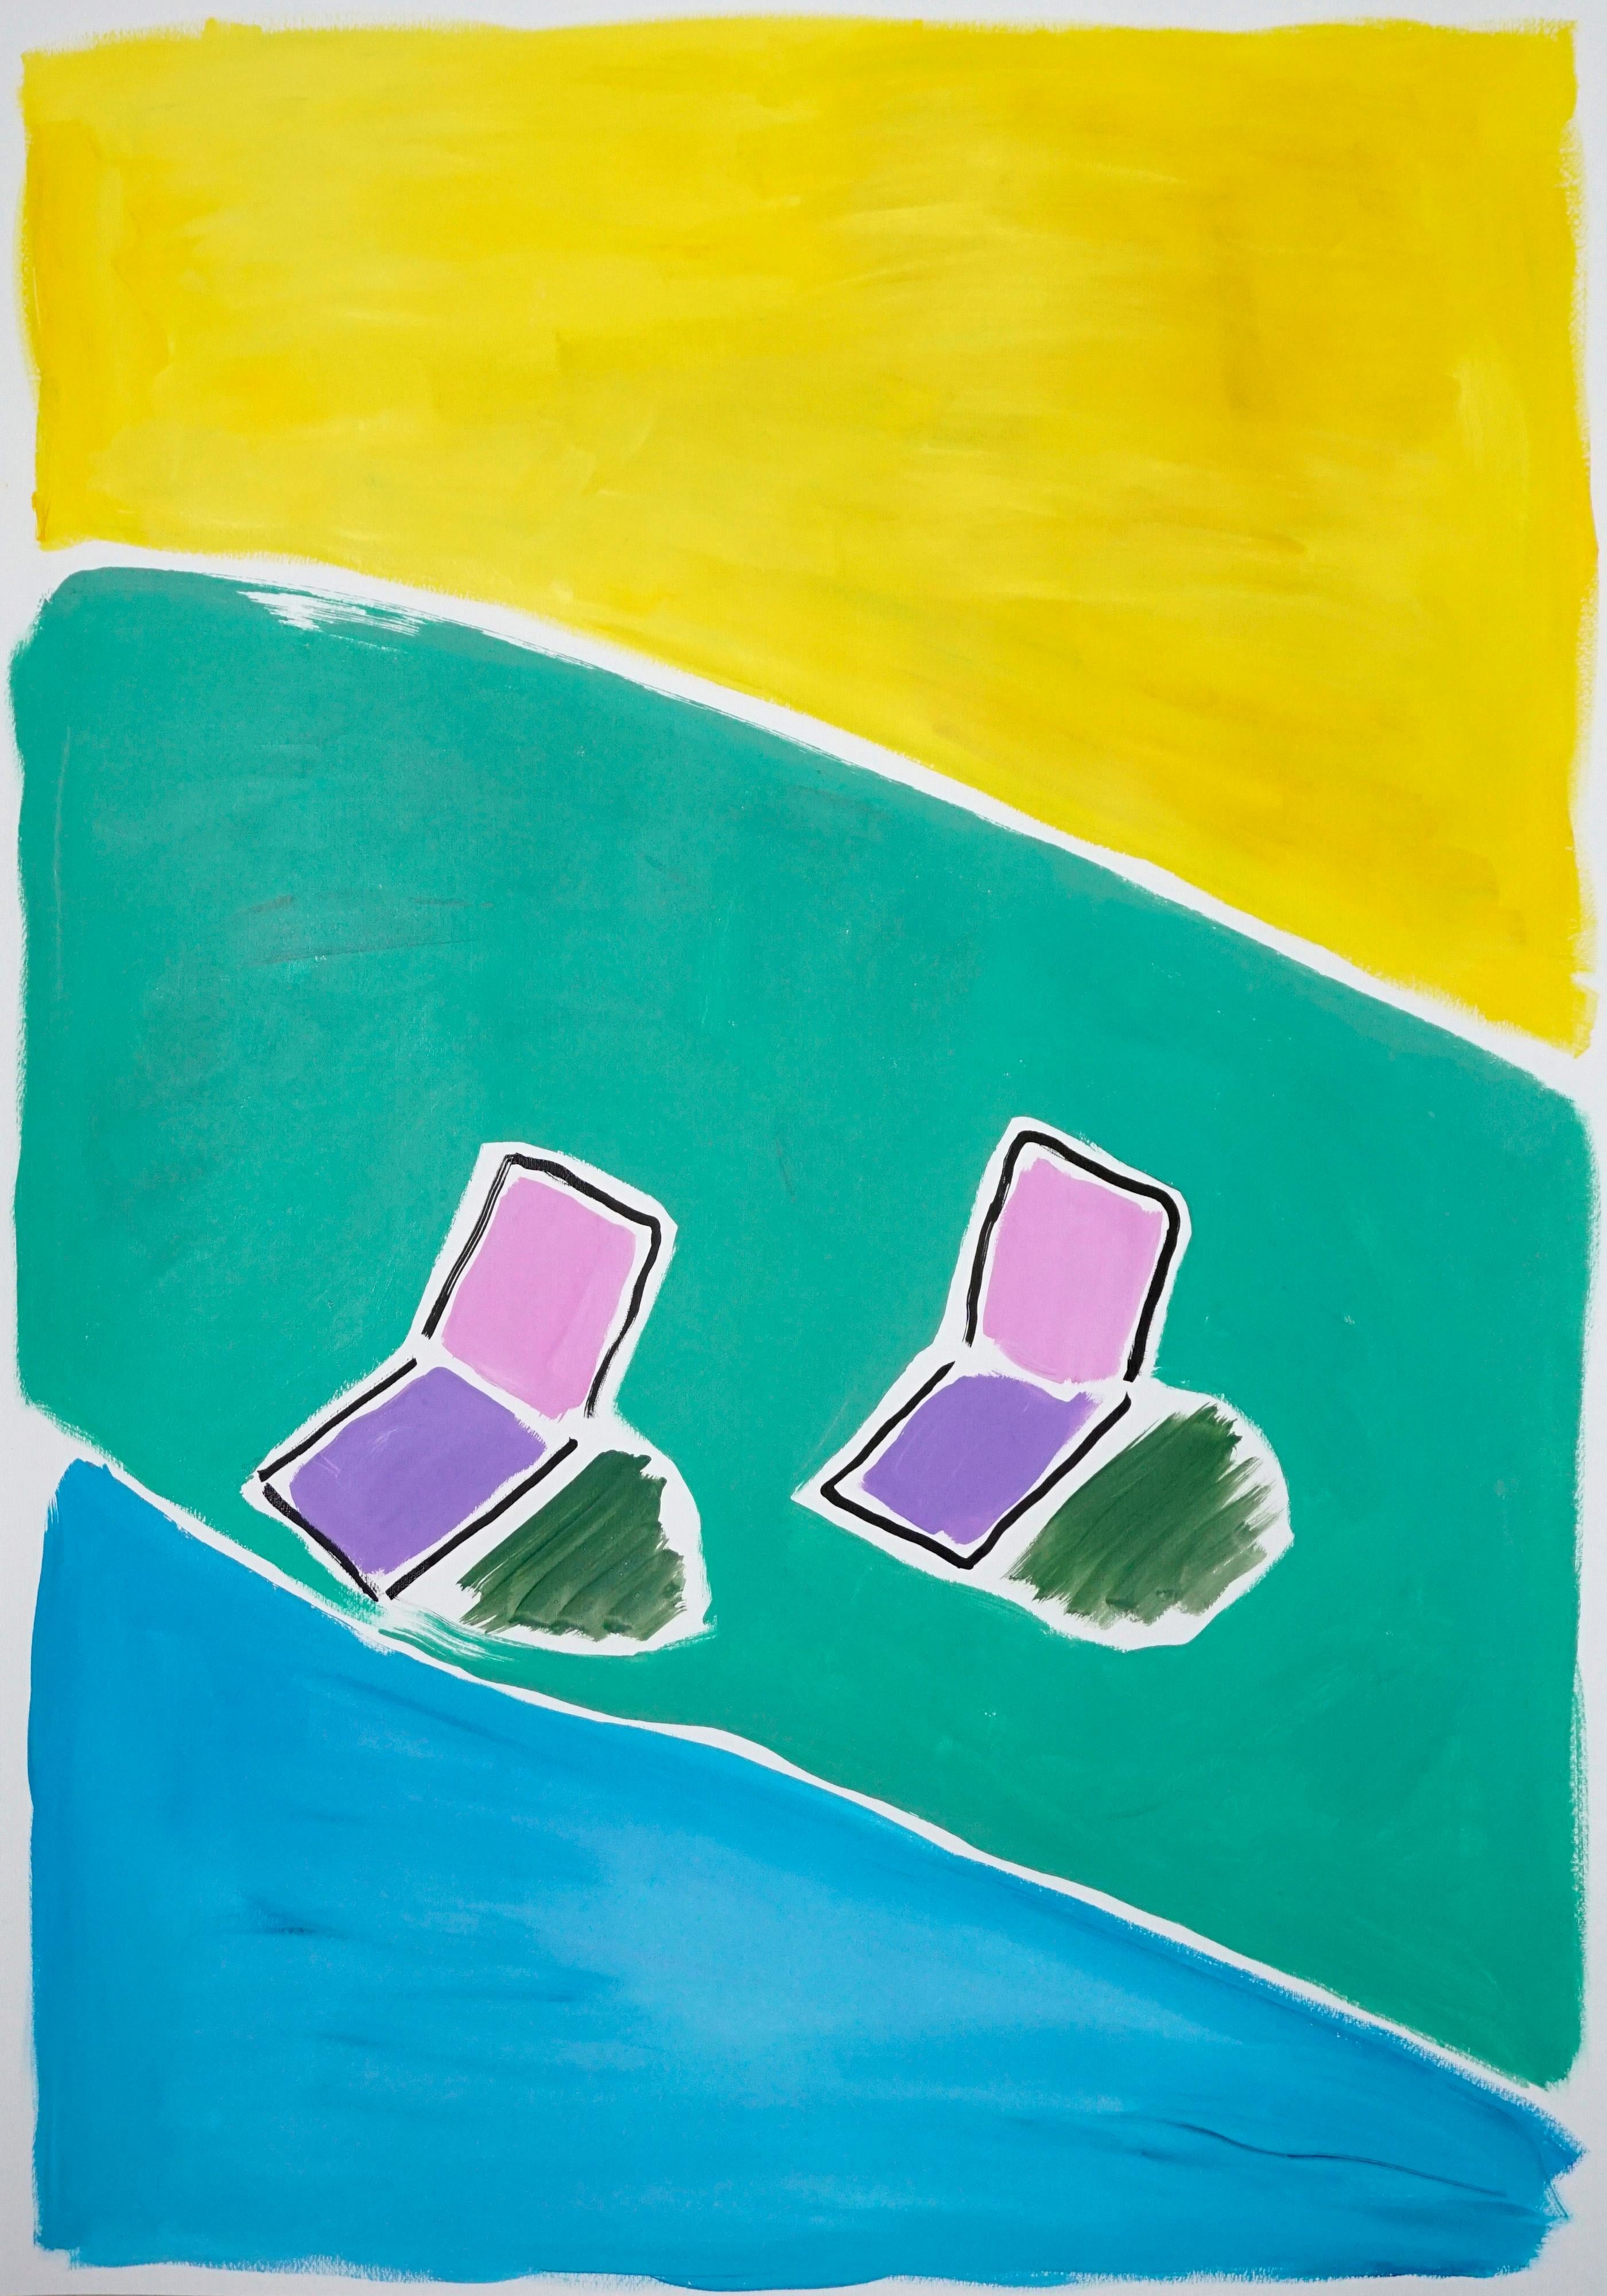 Unknown Landscape Painting - Reclining Chairs at Pool House, Garden Painting on Paper, Hockney Style, 2021